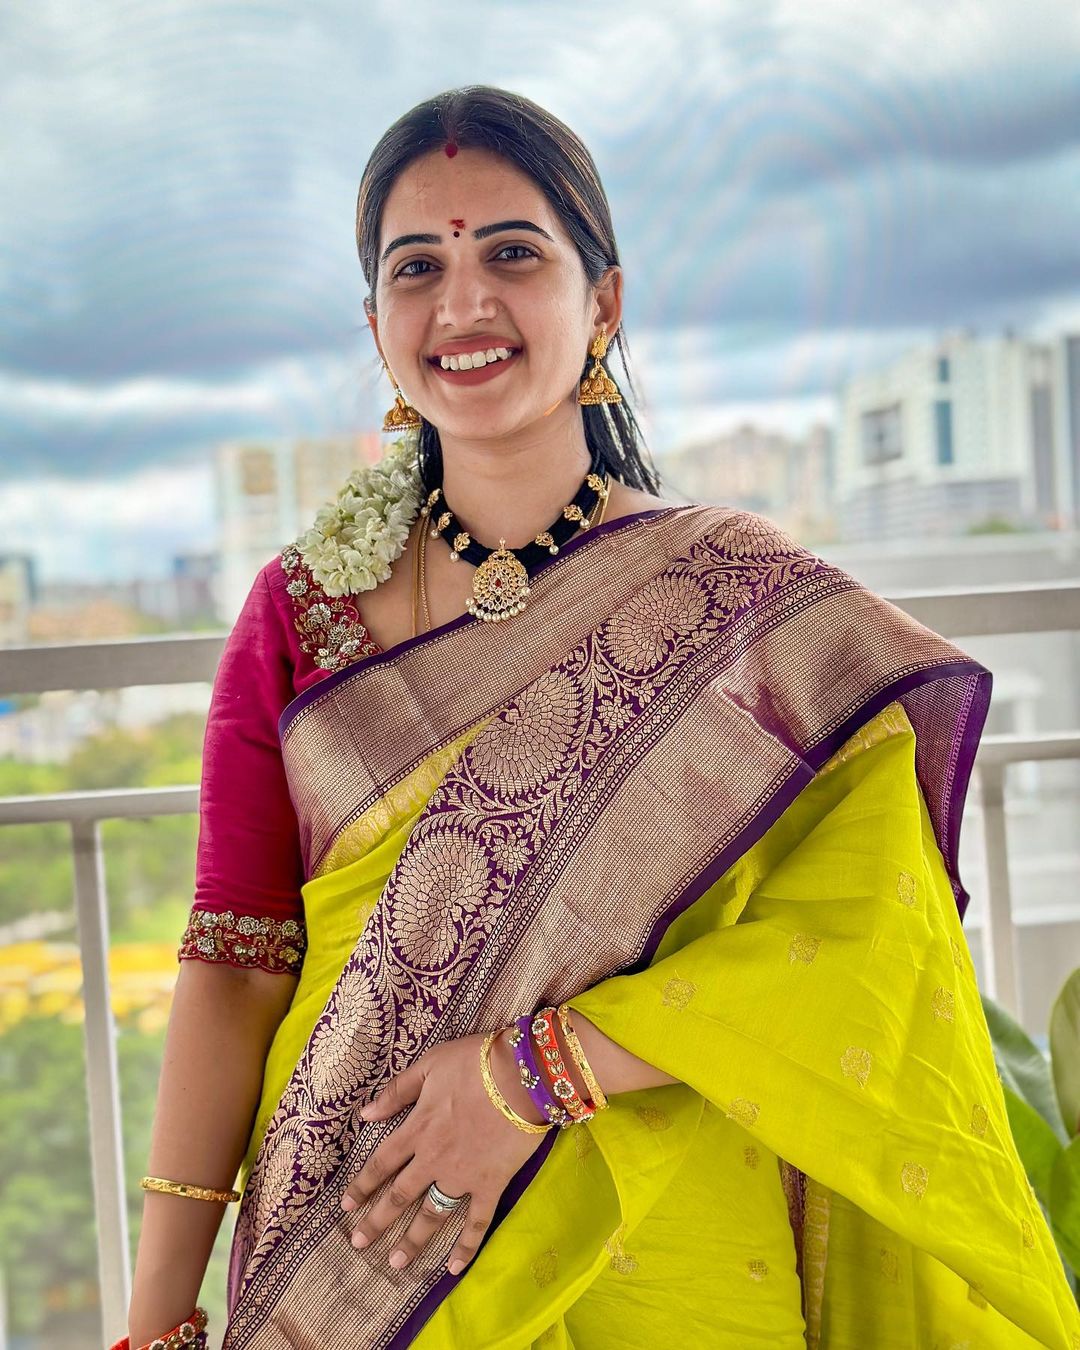 Gorgeous anchor sravanthi chokarapu latest traditional looks-Anchorsravanthi Photos,Spicy Hot Pics,Images,High Resolution WallPapers Download